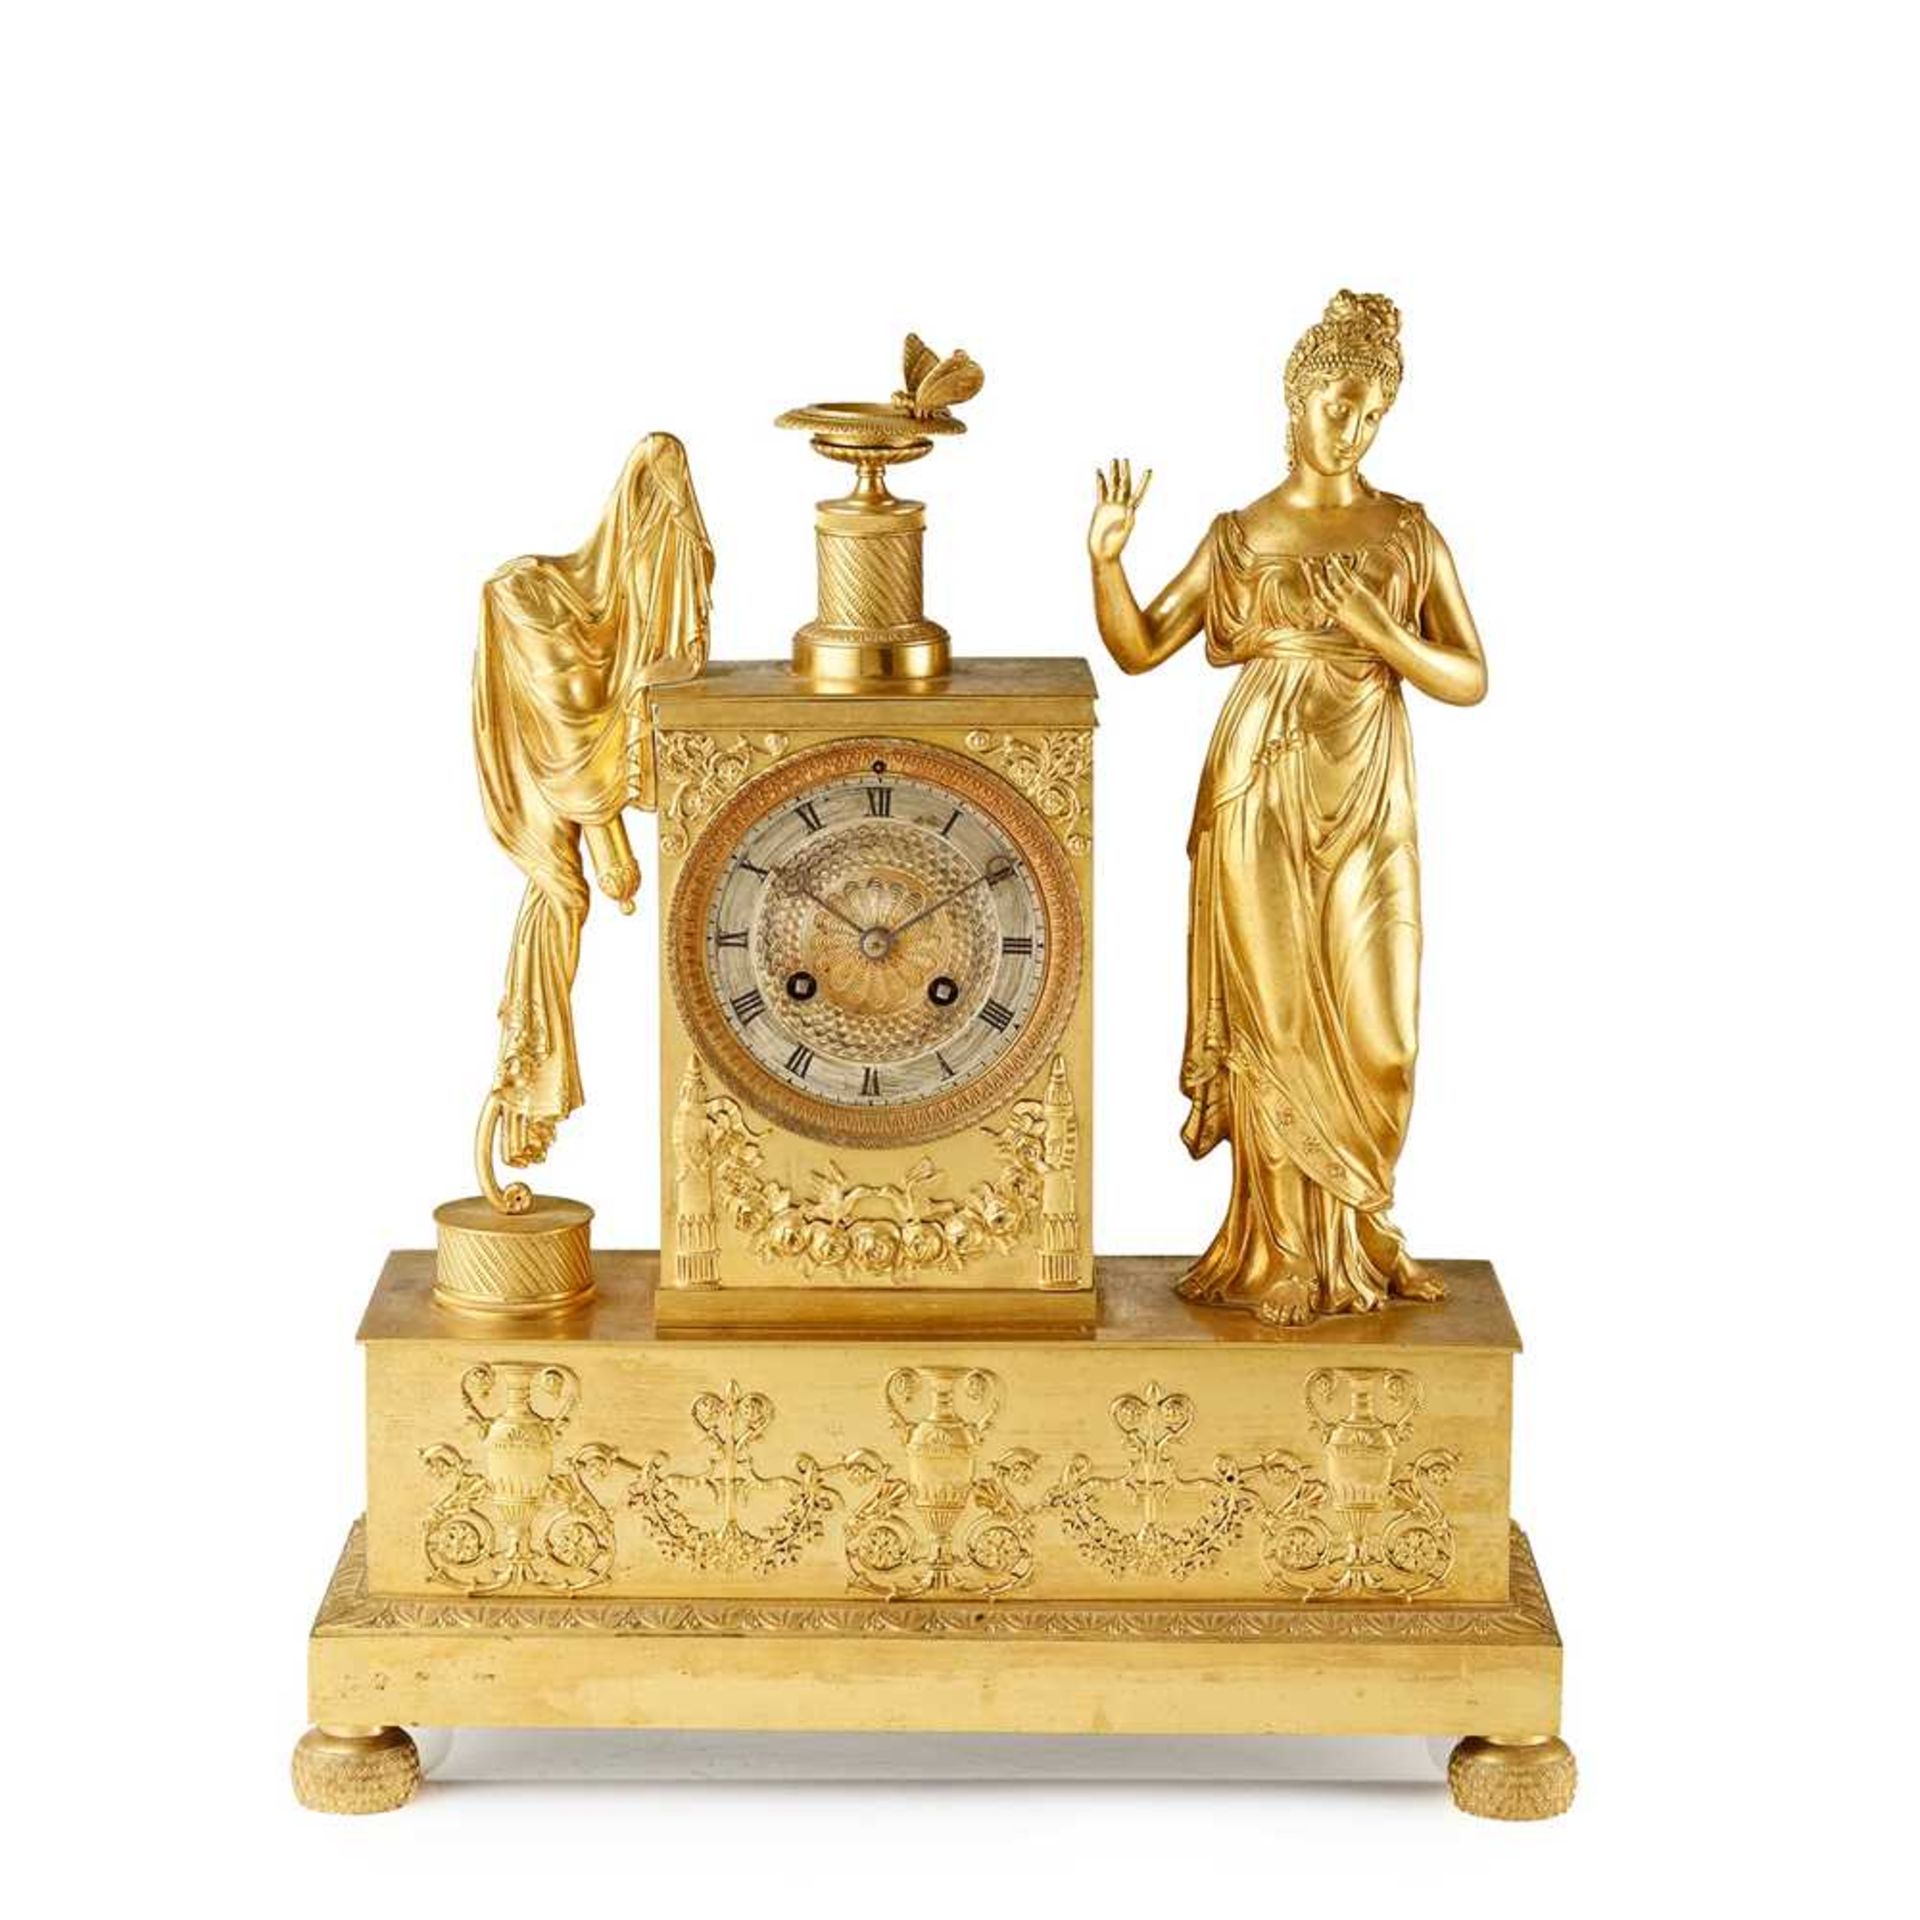 FRENCH EMPIRE FIGURAL GILT METAL MANTEL CLOCK EARLY 19TH CENTURY